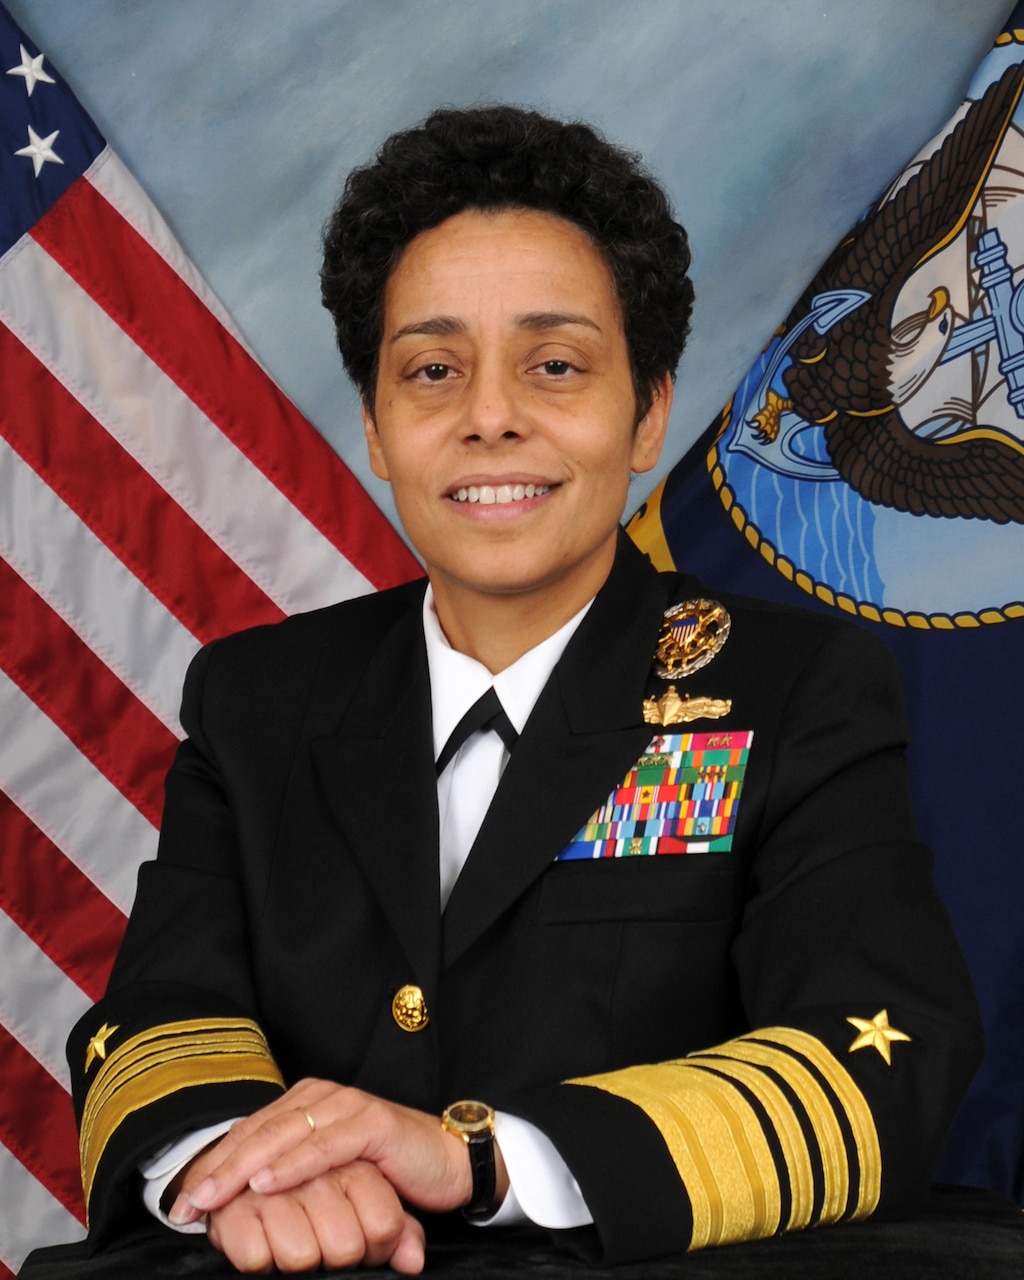 Navy Adm. Michelle J. Howard is the vice chief of naval operations. She graduated from the U.S. Naval Academy in Annapolis, Md., in 1982. Howard became the Navy’s first female four-star admiral on July 1, 2014. U.S. Navy photo